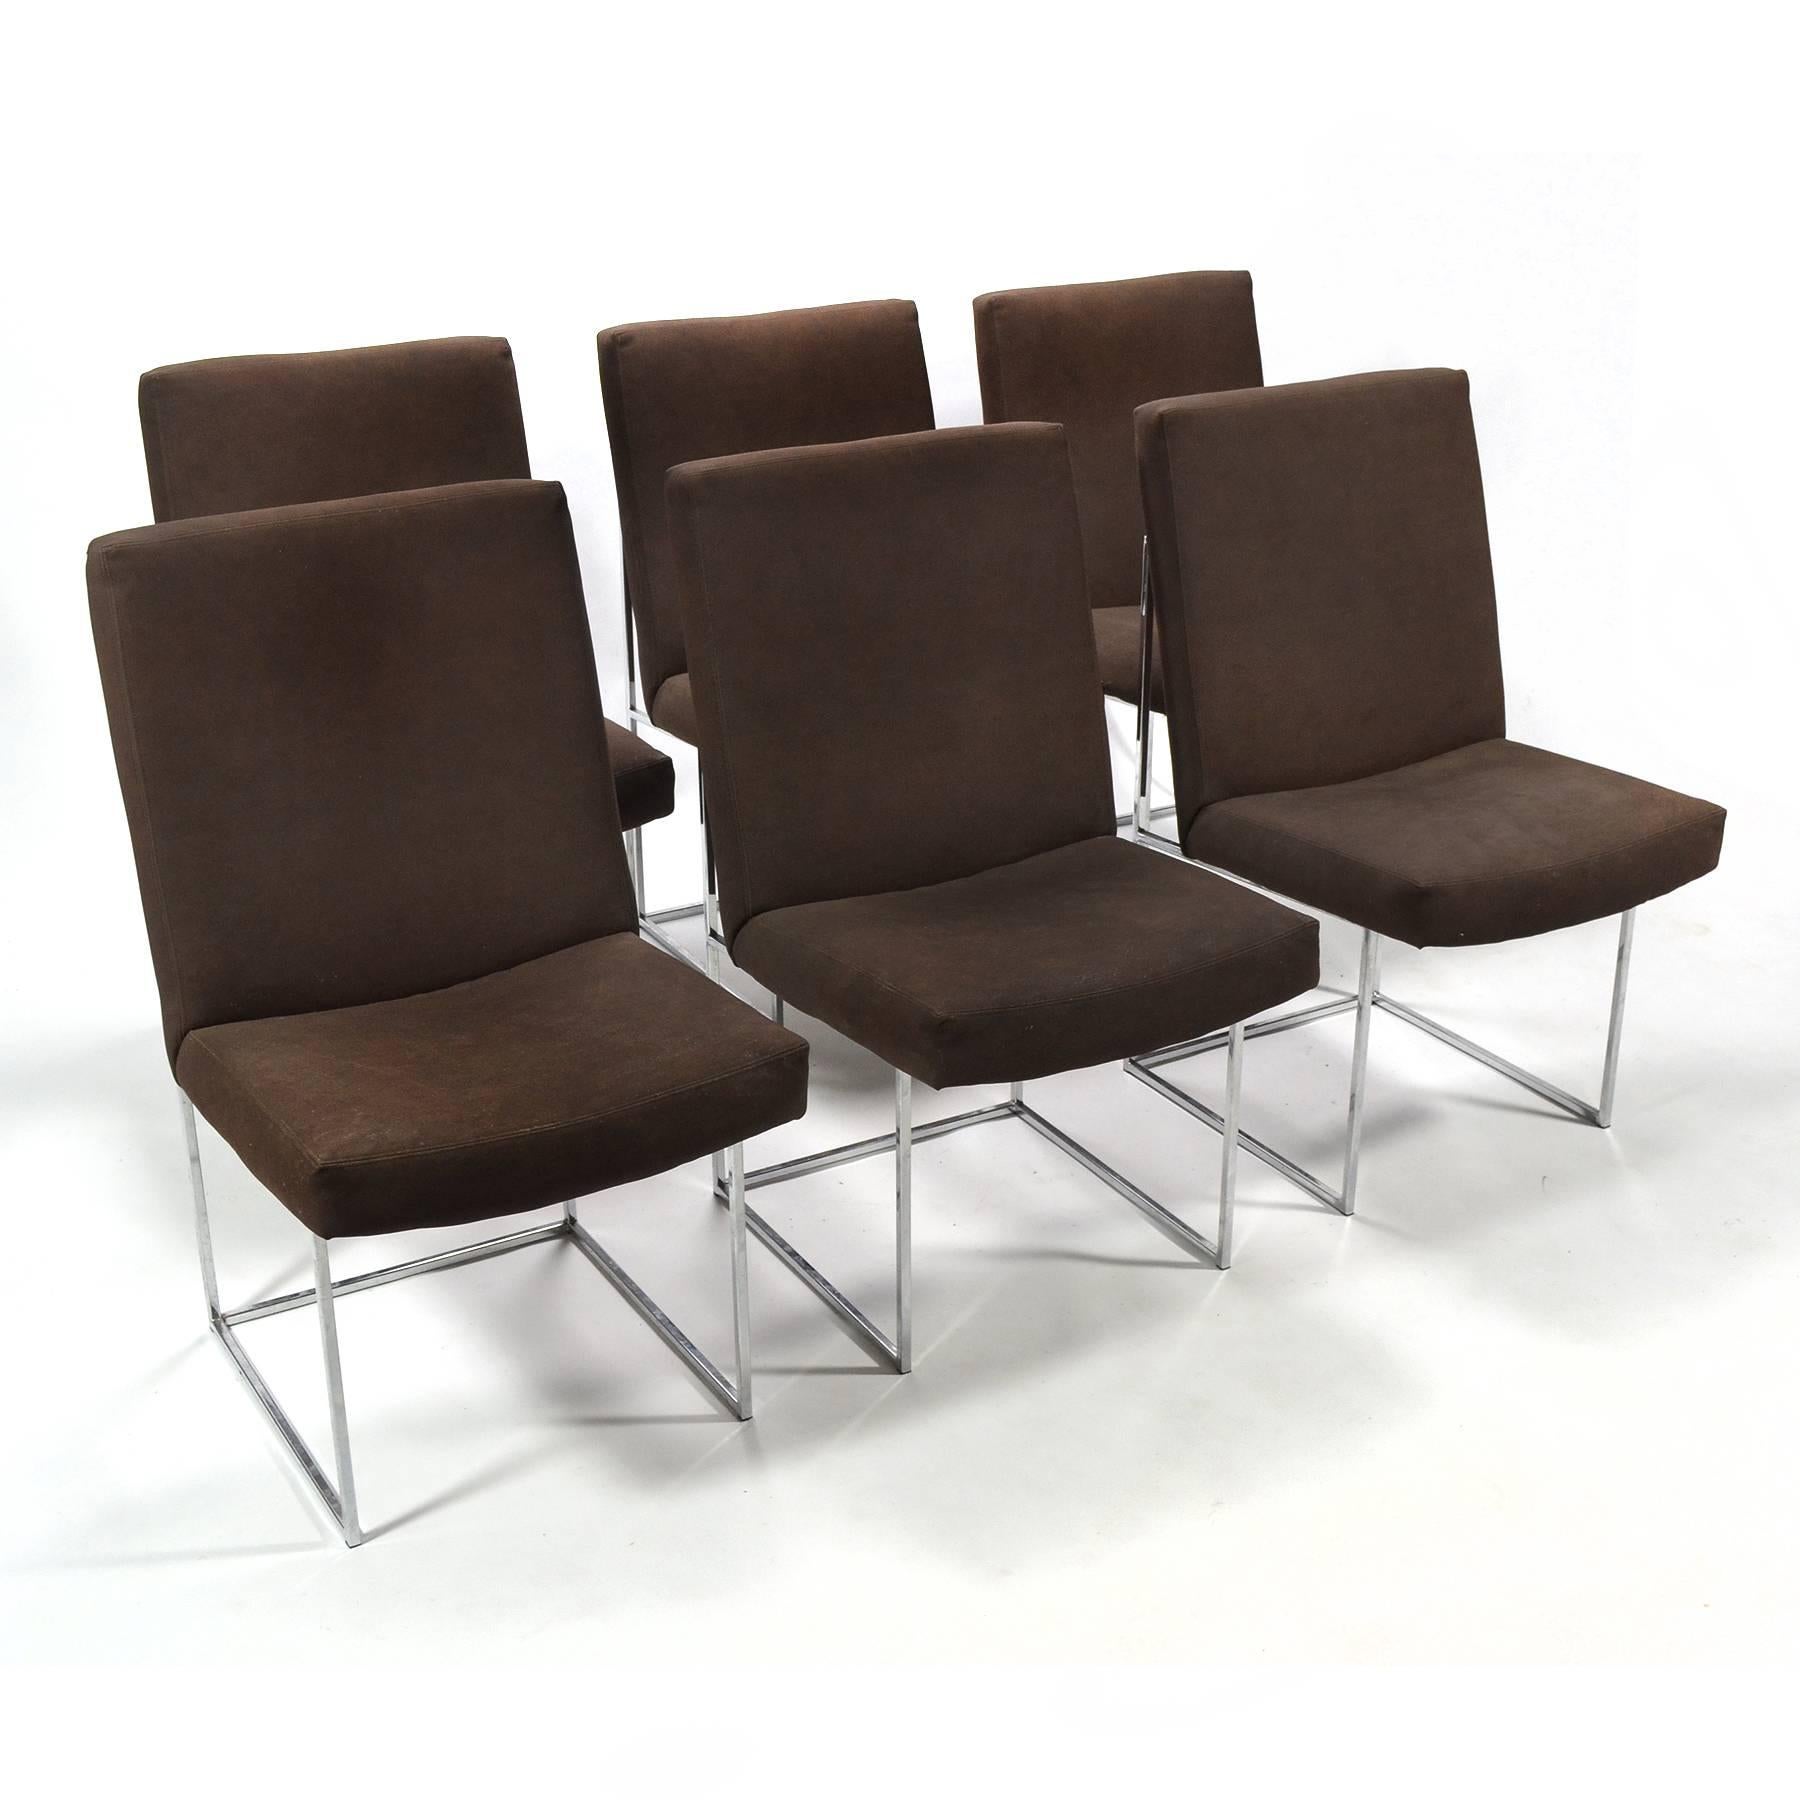 This is one of our favorite designs by Milo Baughman. These dining chairs have a beautiful architectural base of polished chrome square stock steel supporting an upholstered seat and back. The clean, unadorned design is almost starkly minimal and